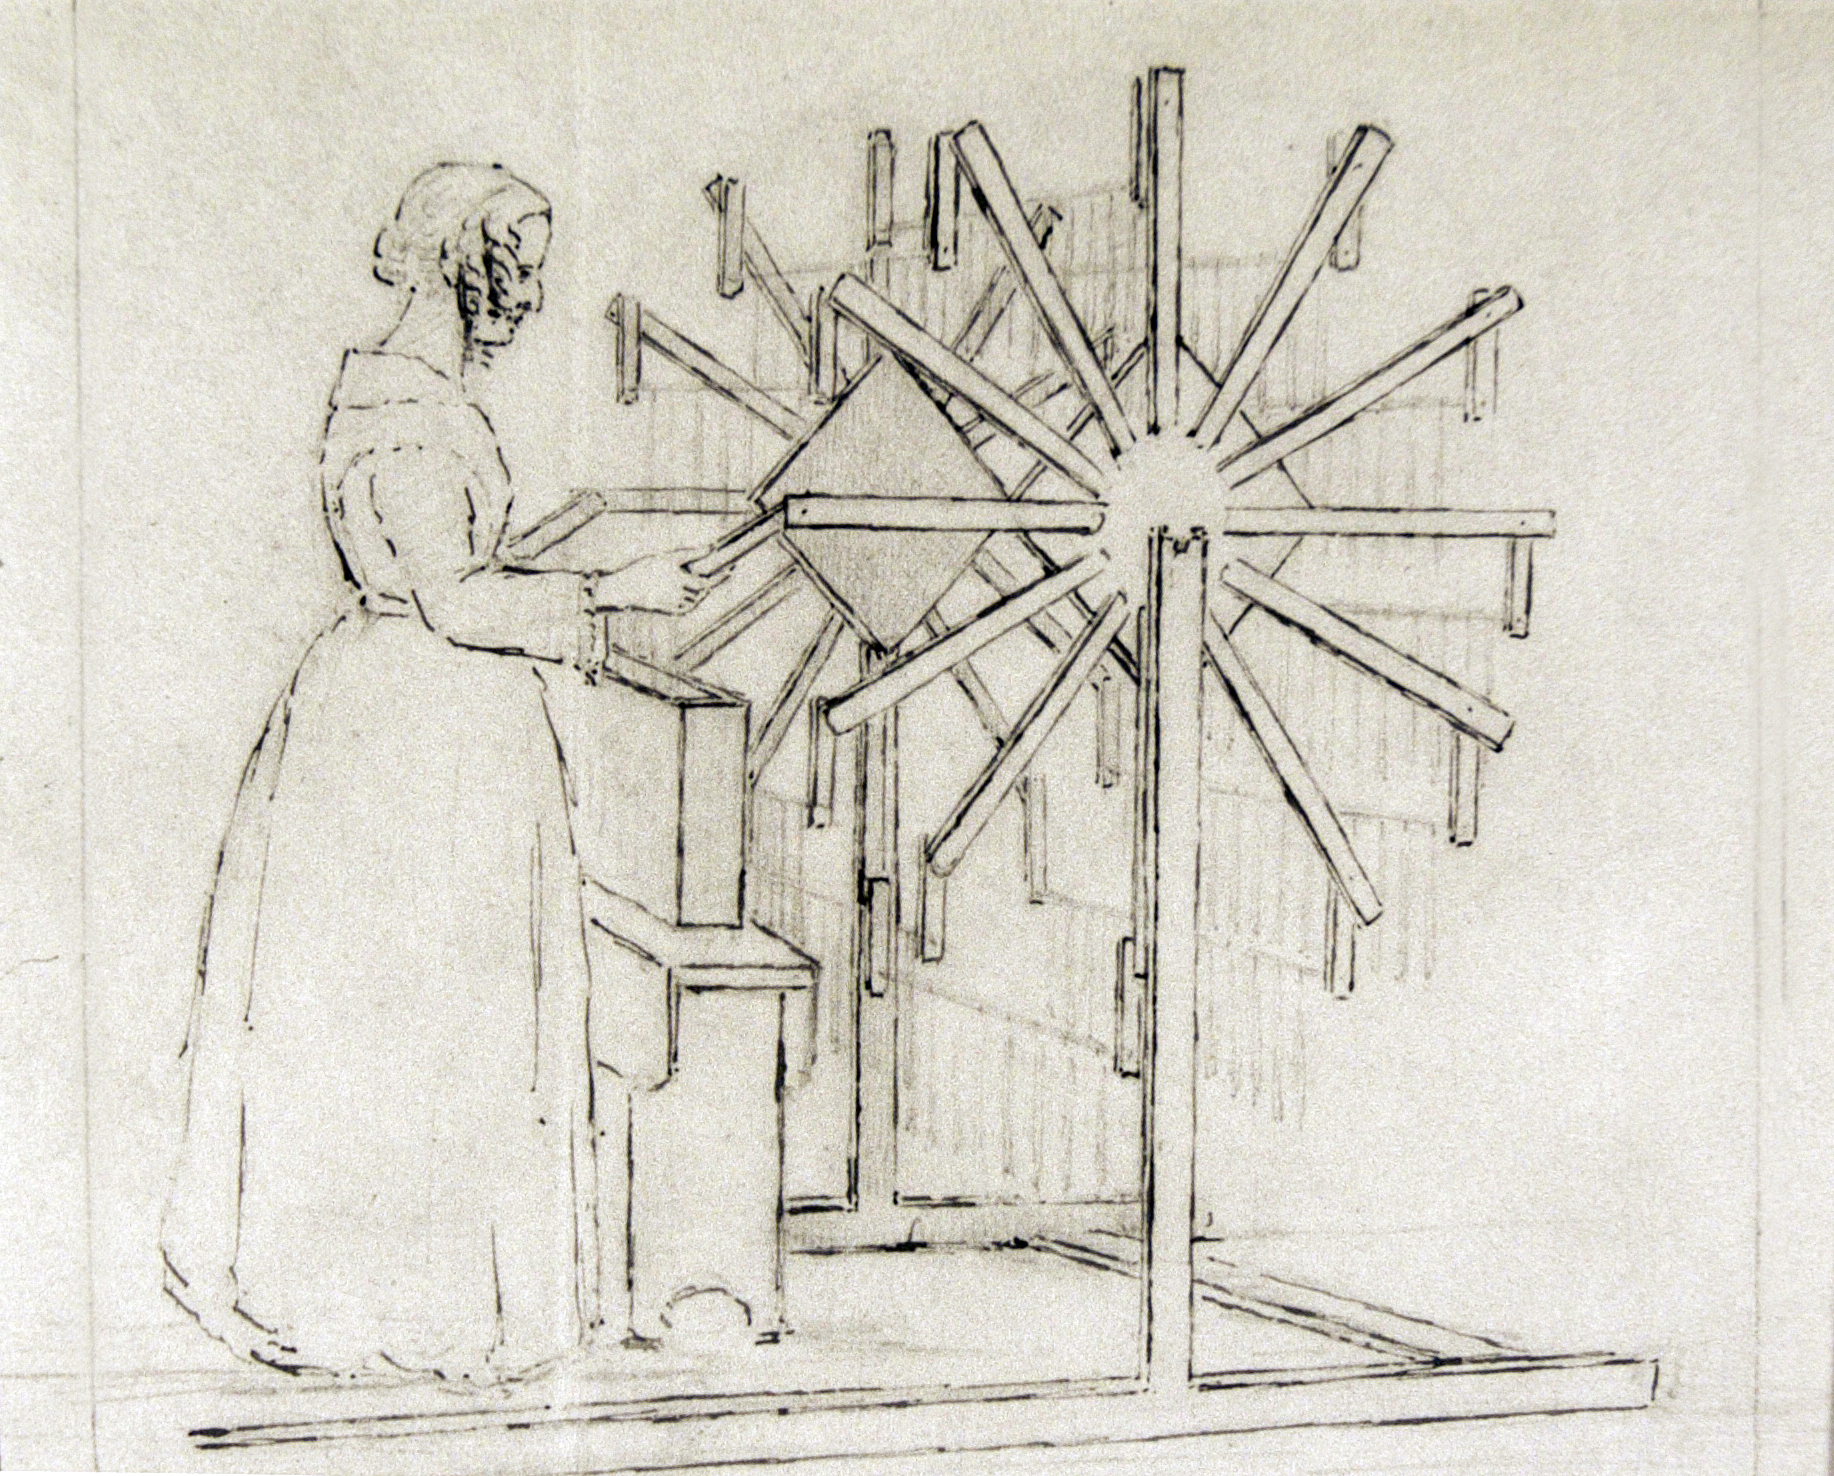 Charcoal pencil sketch from early 19th century. A woman stands at a round wooden structure. There are 12 arms on each side each holding a candle.